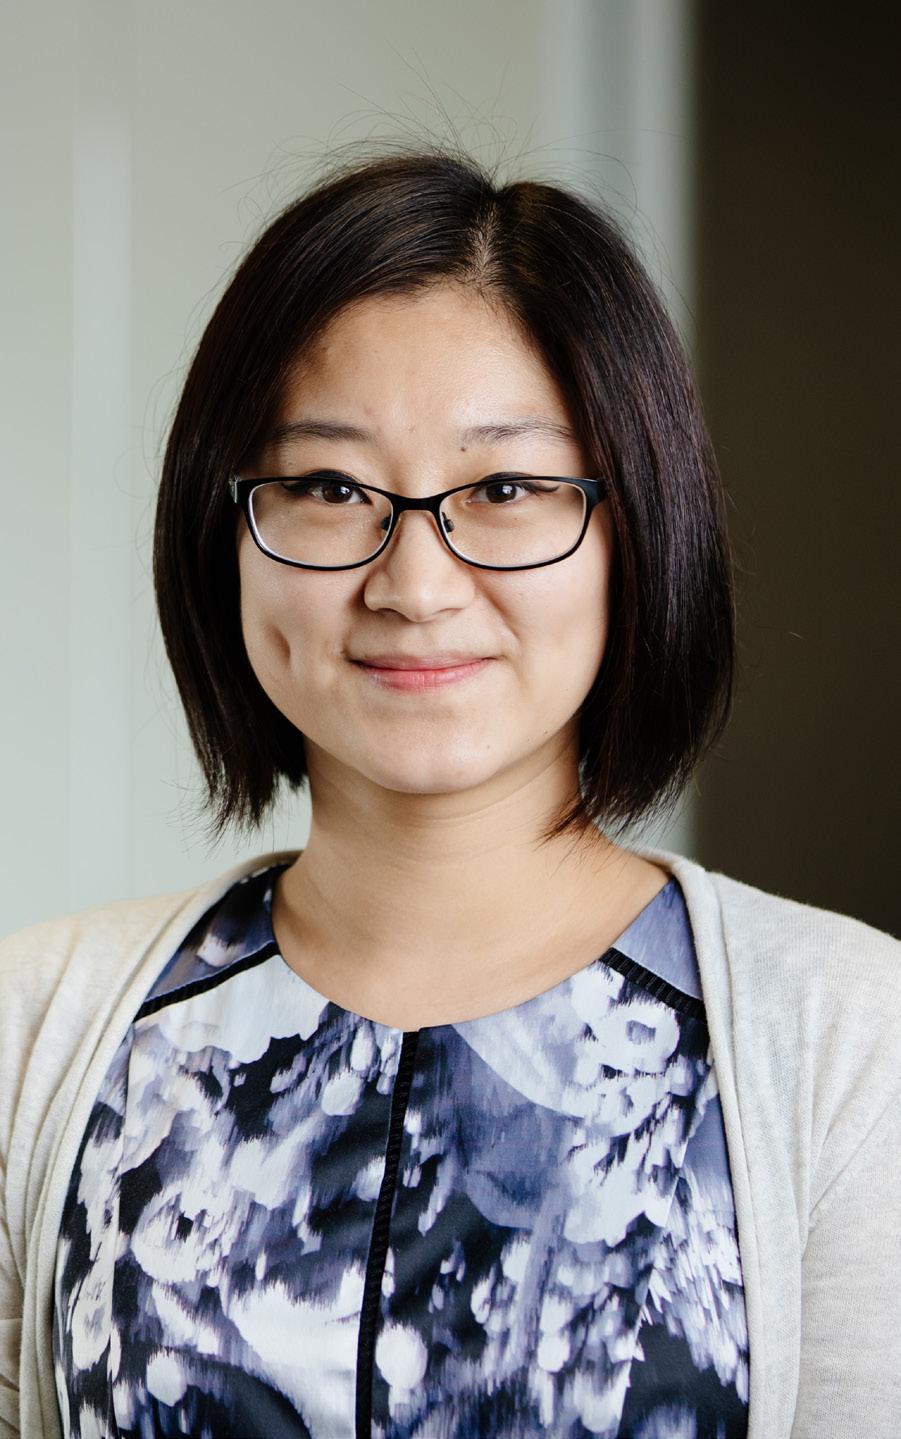 > VICKIE LI TEAM PROFILE: VICKIE LI Vickie Li recently joined our Australian-based team in Melbourne as a Property Accountant.